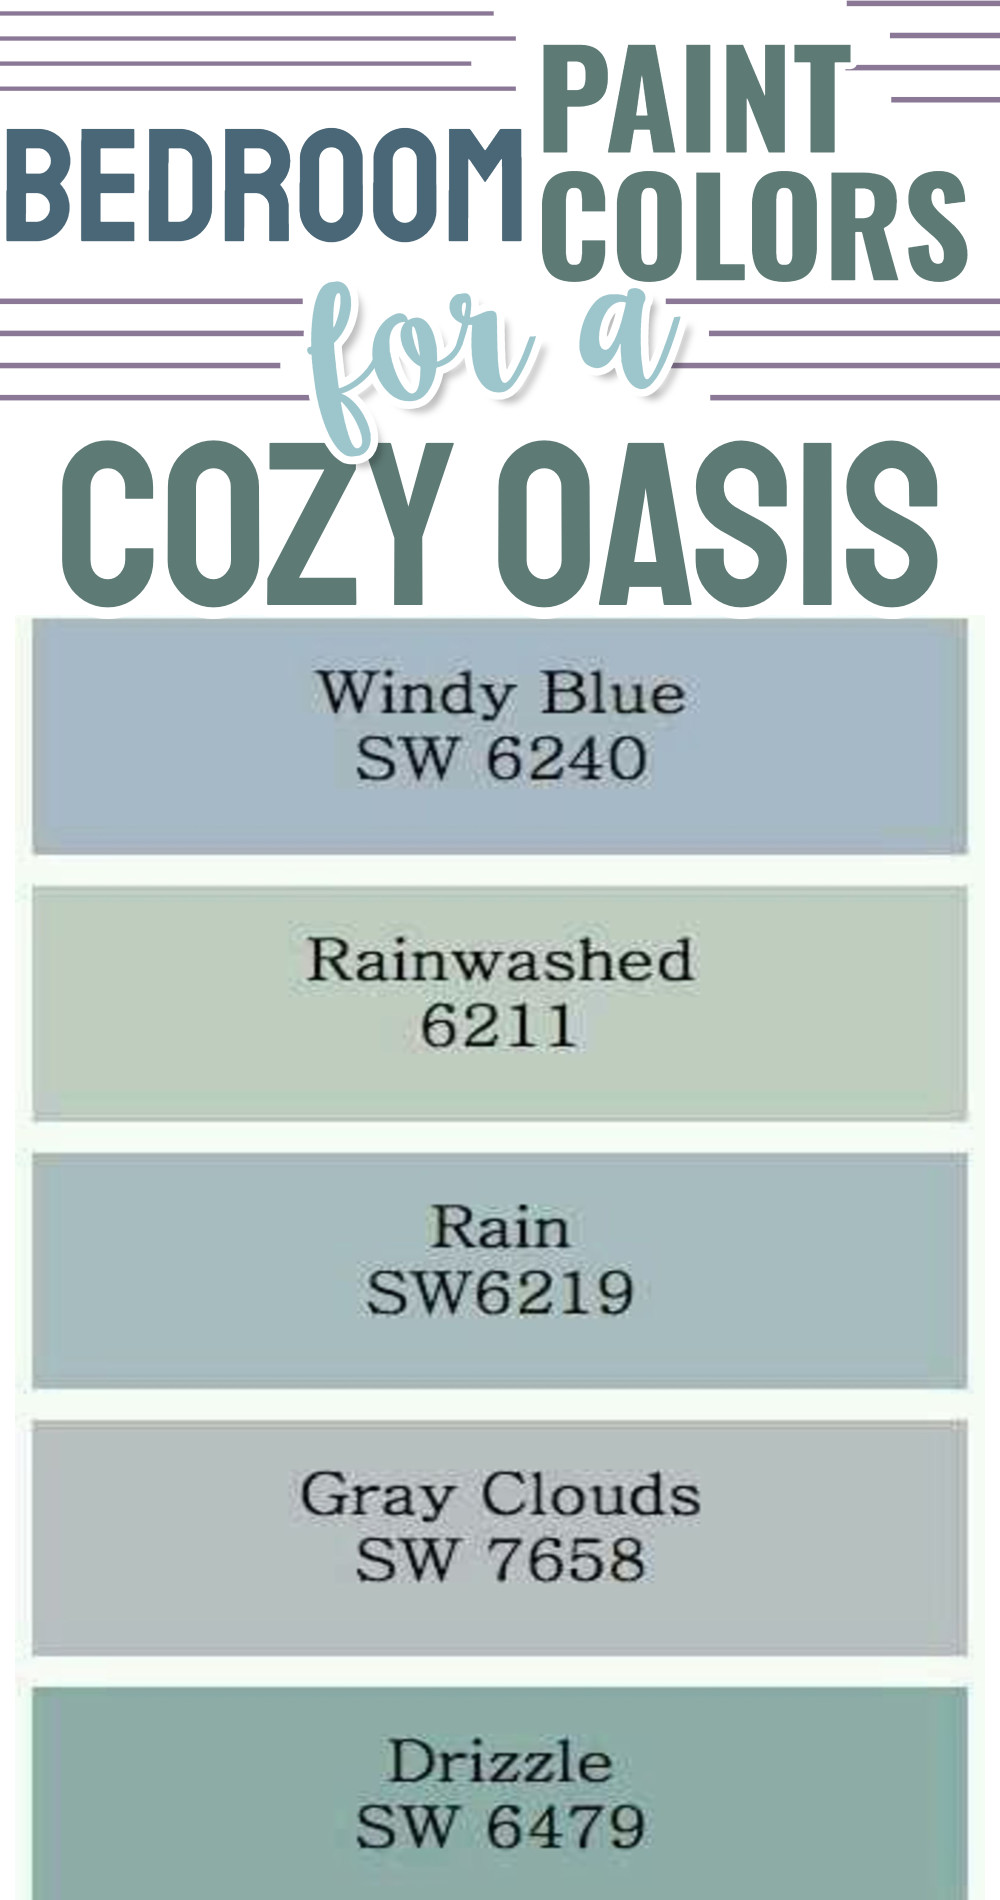 5 bedroom paint colors for a cozy oasis